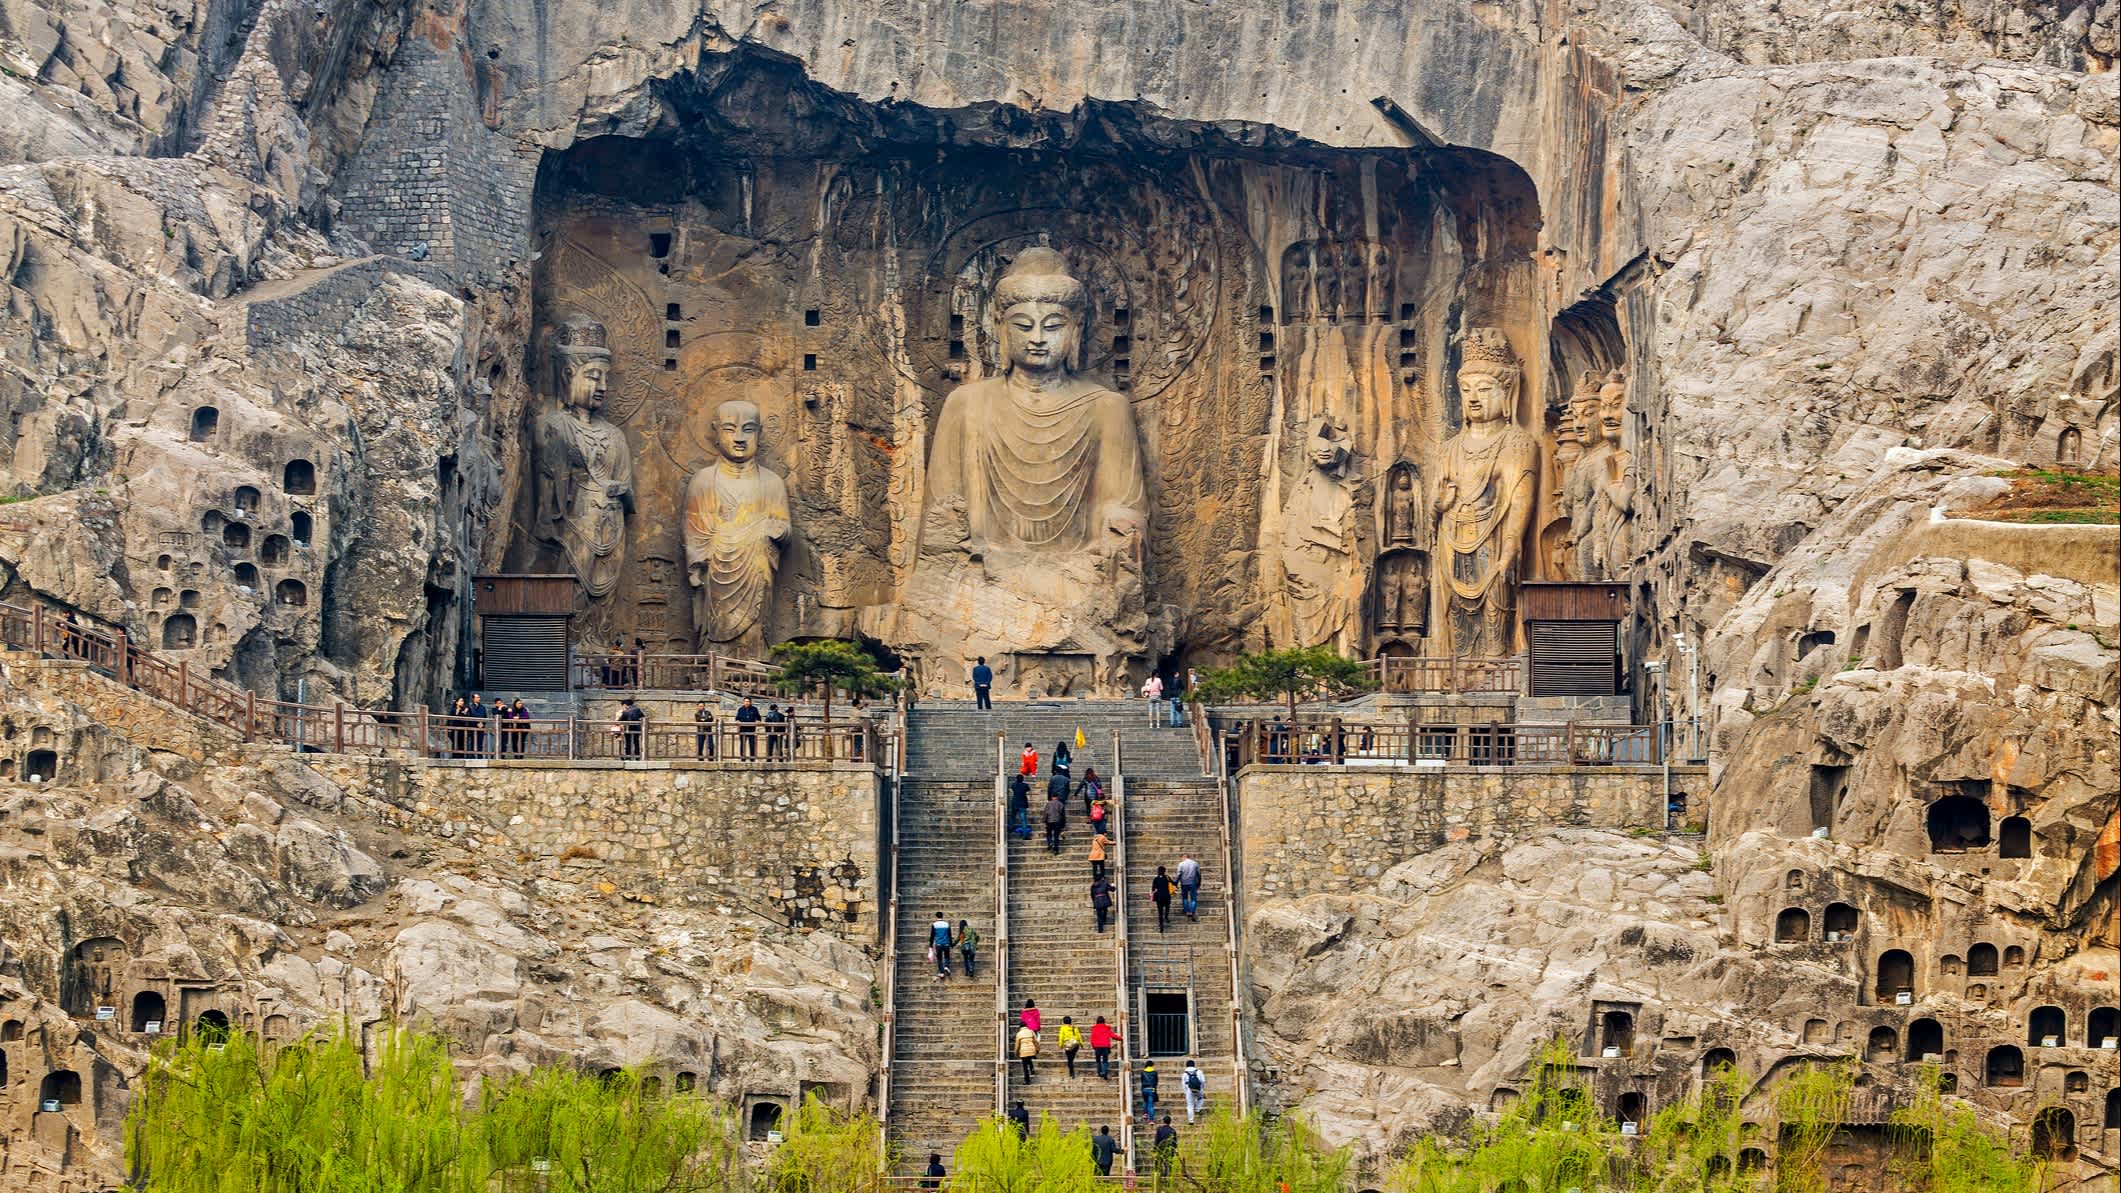 People on the stairs leading towards the Buddha statue, Luoyang, China